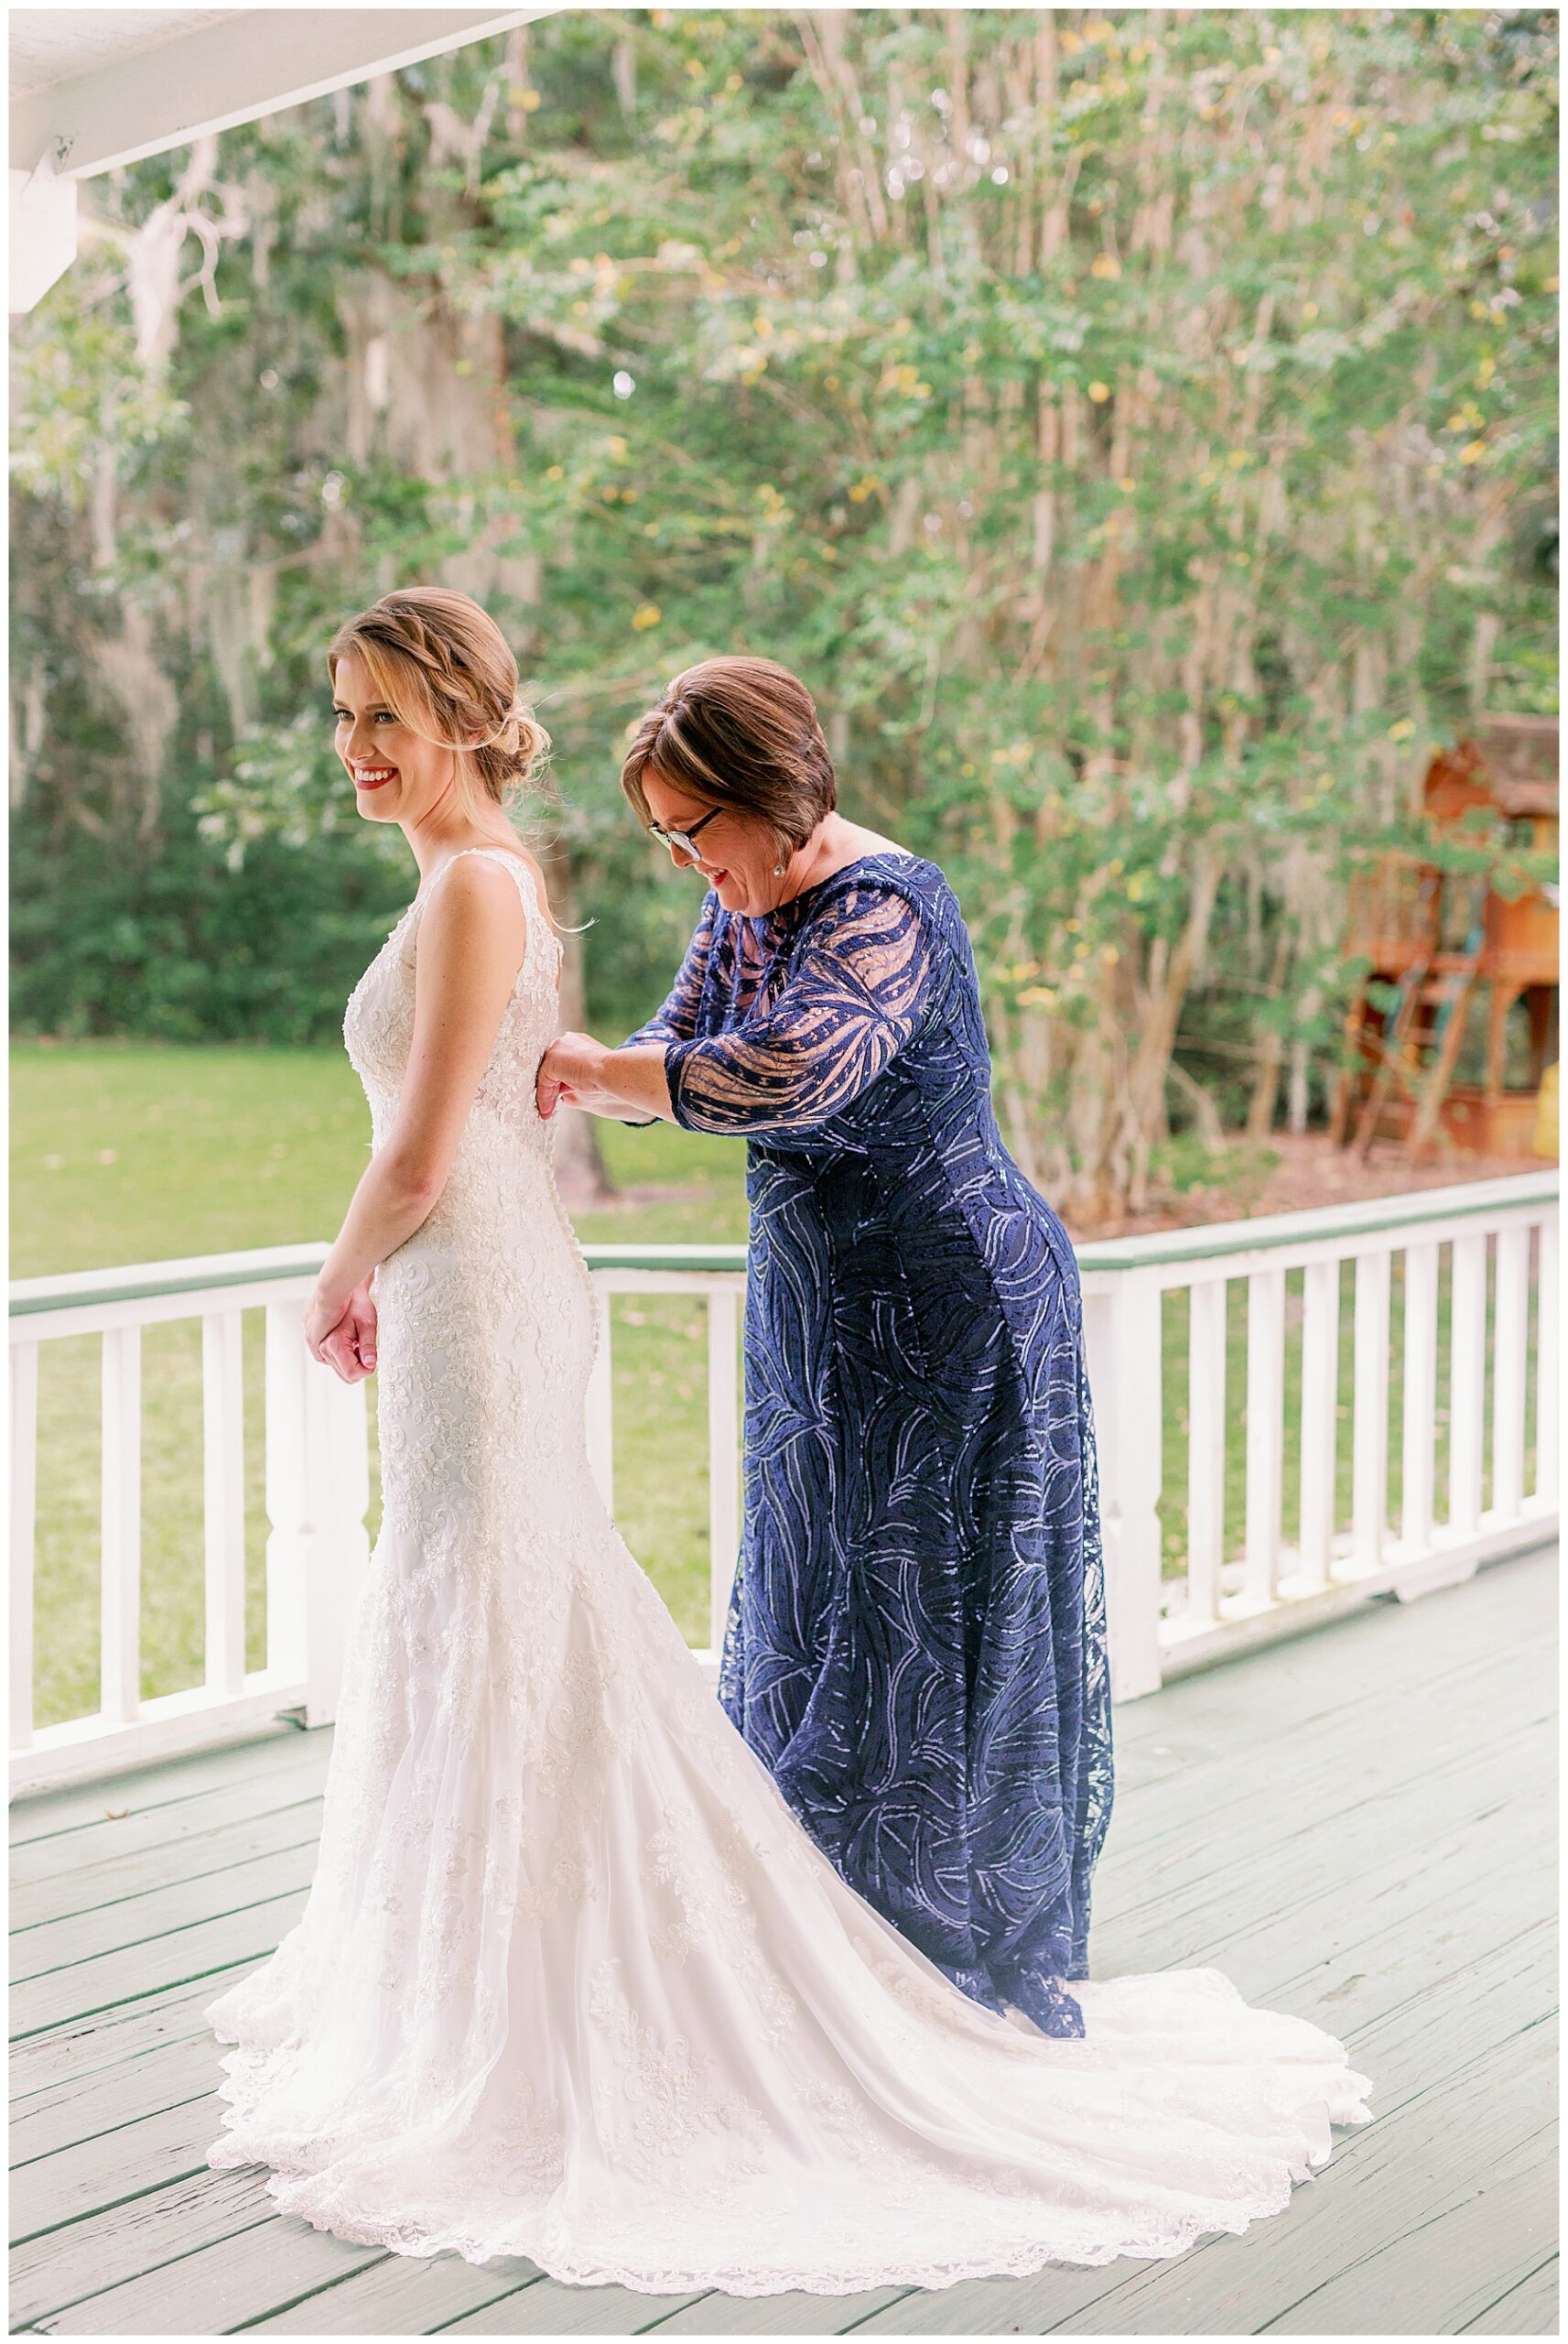 Bride's mom dressed in navy blue gown helps zip up her daughter's dress and she gets ready for her wedding